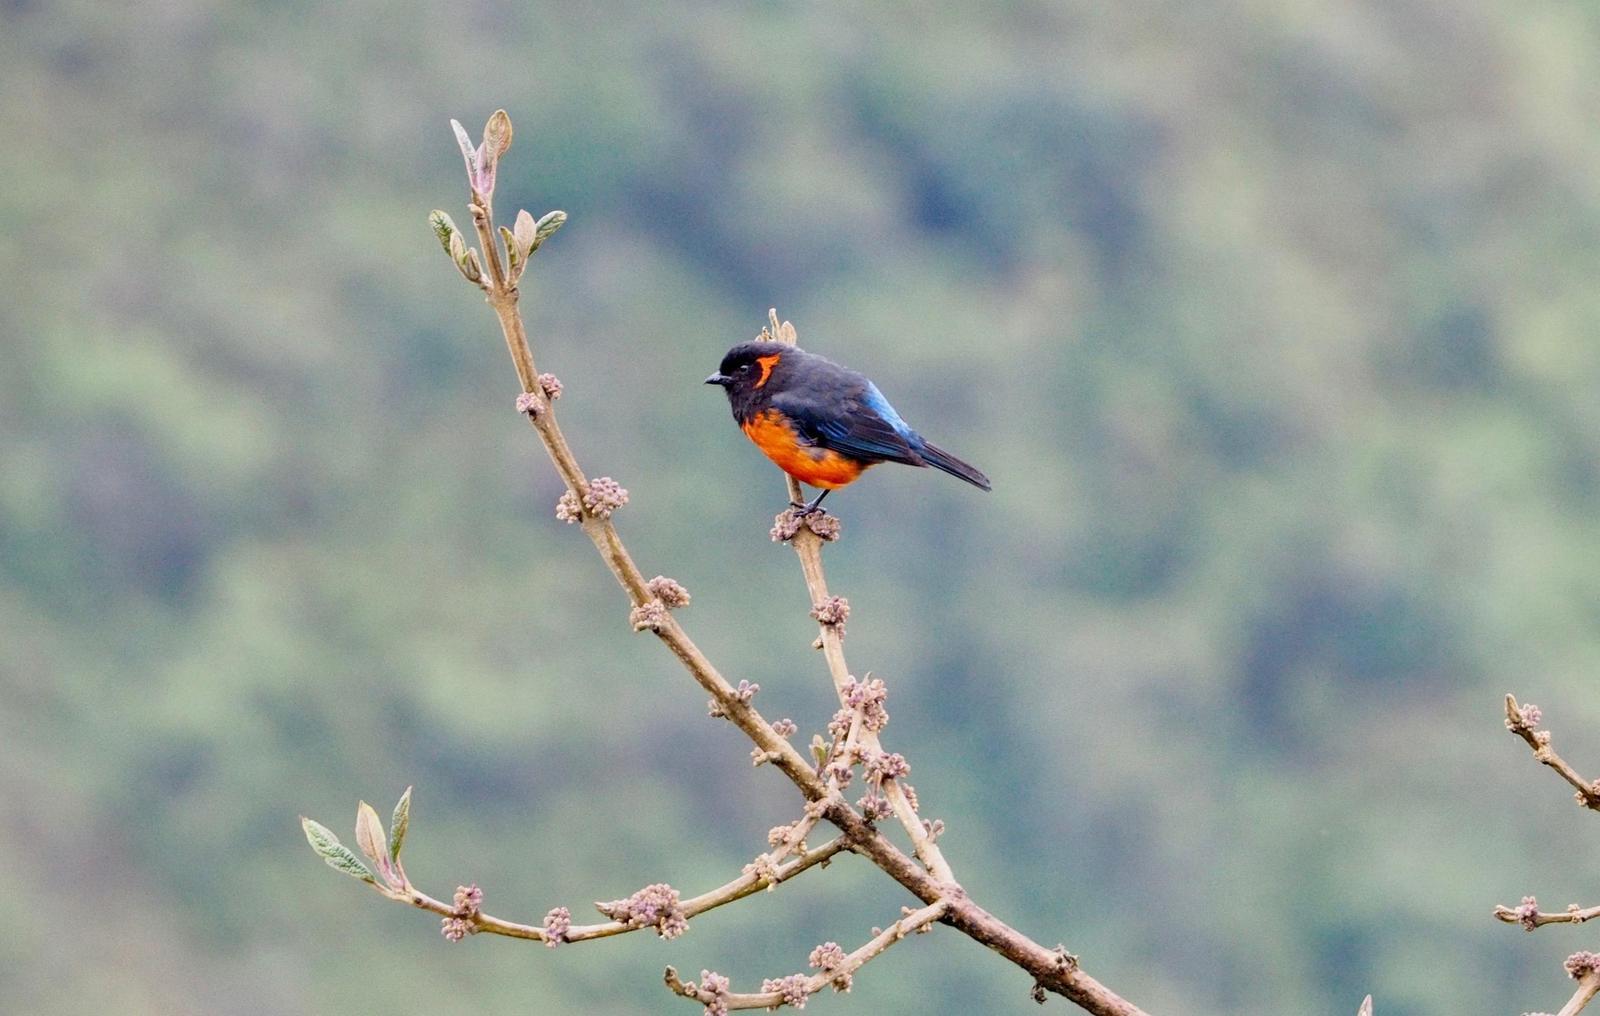 Lacrimose Mountain-Tanager (melanops) Photo by Geraint Langford